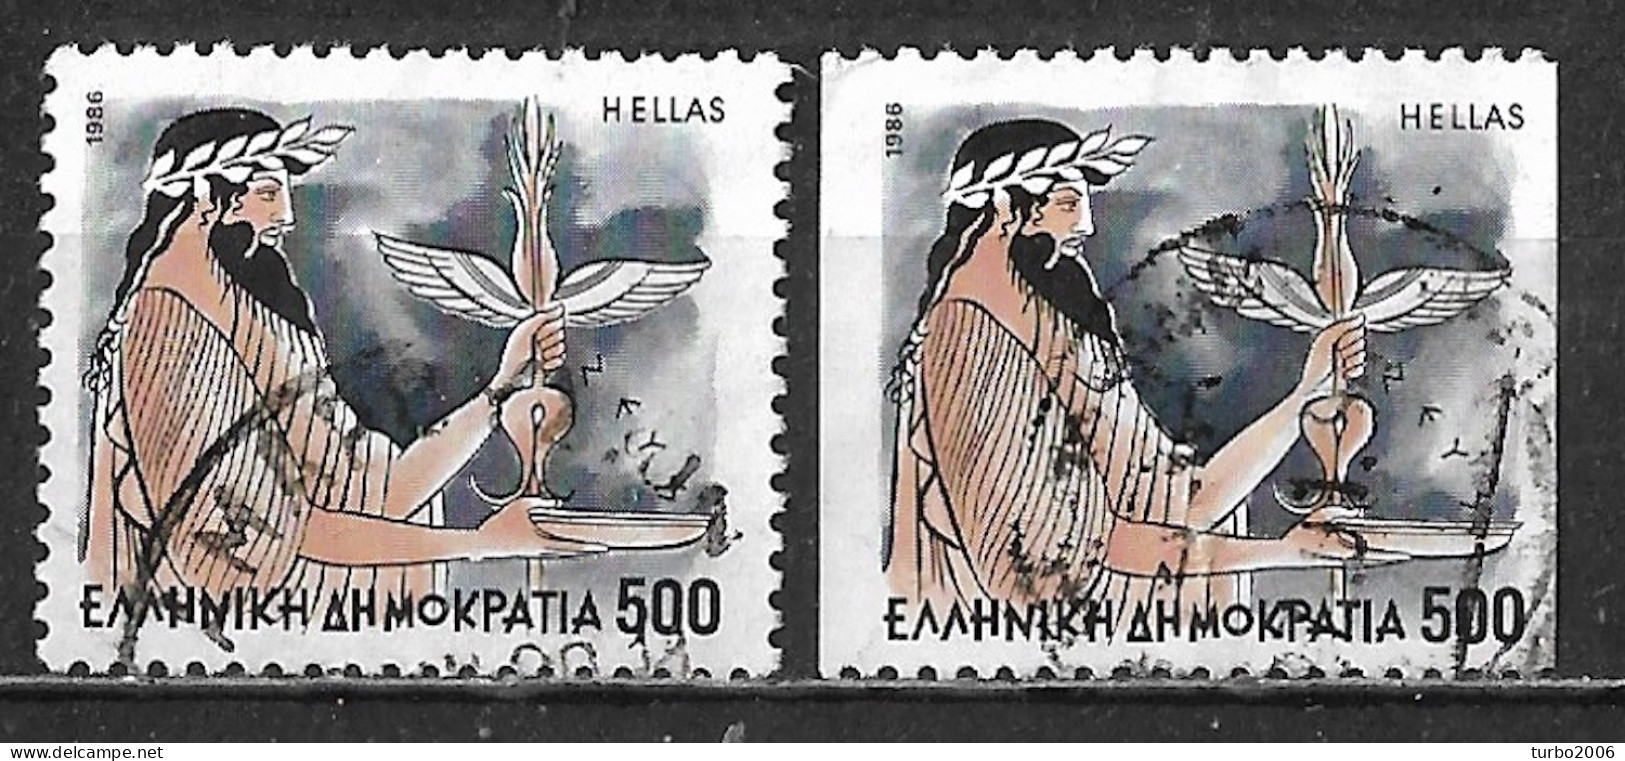 GREECE 1986 Olympian Gods 500 Dr. 4 And 2 Sides Perforated Both Key Values Used Vl. 1679 + 1679 A - Oblitérés